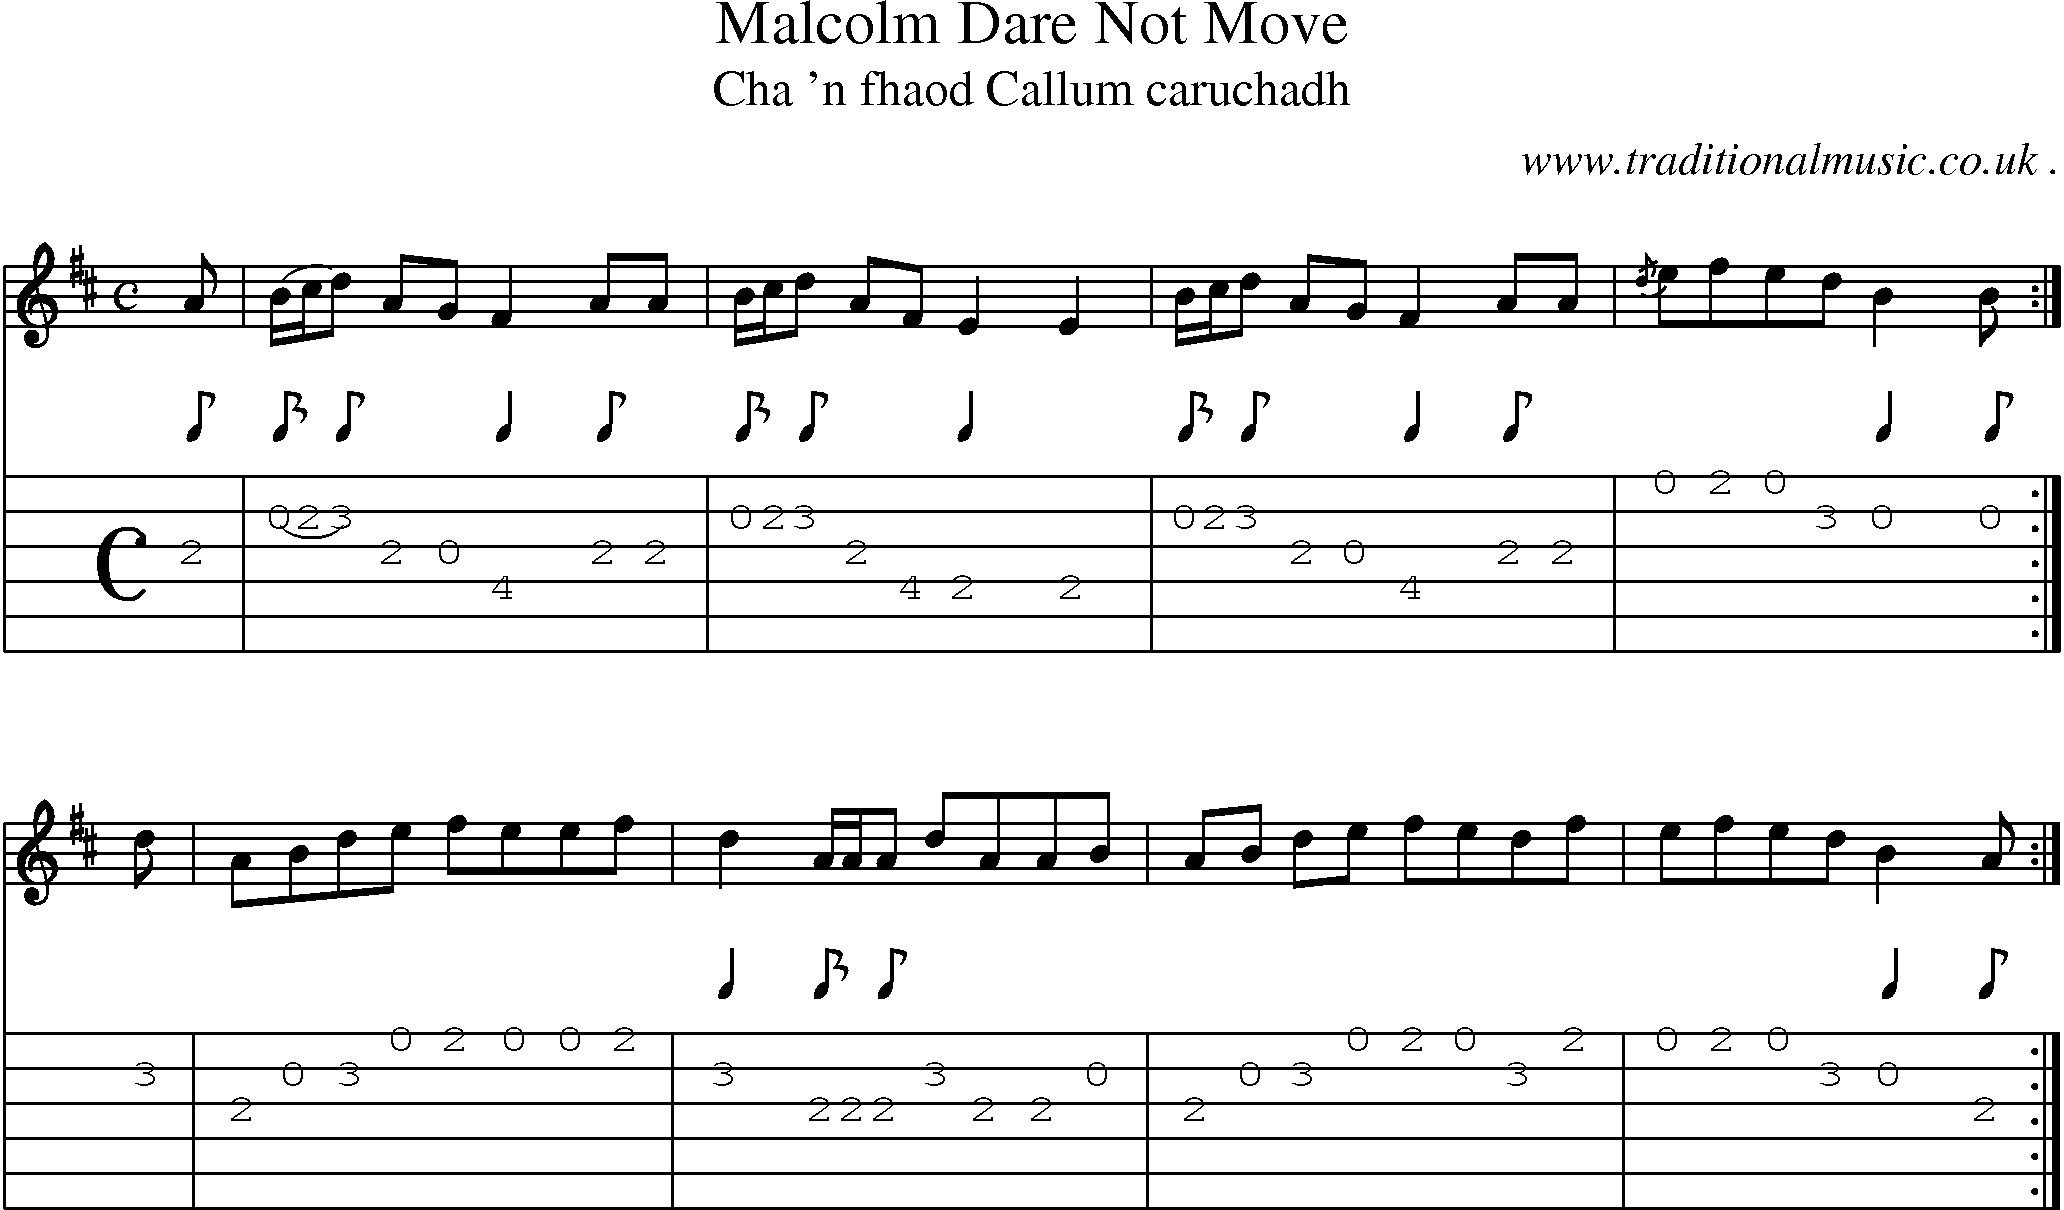 Sheet-music  score, Chords and Guitar Tabs for Malcolm Dare Not Move